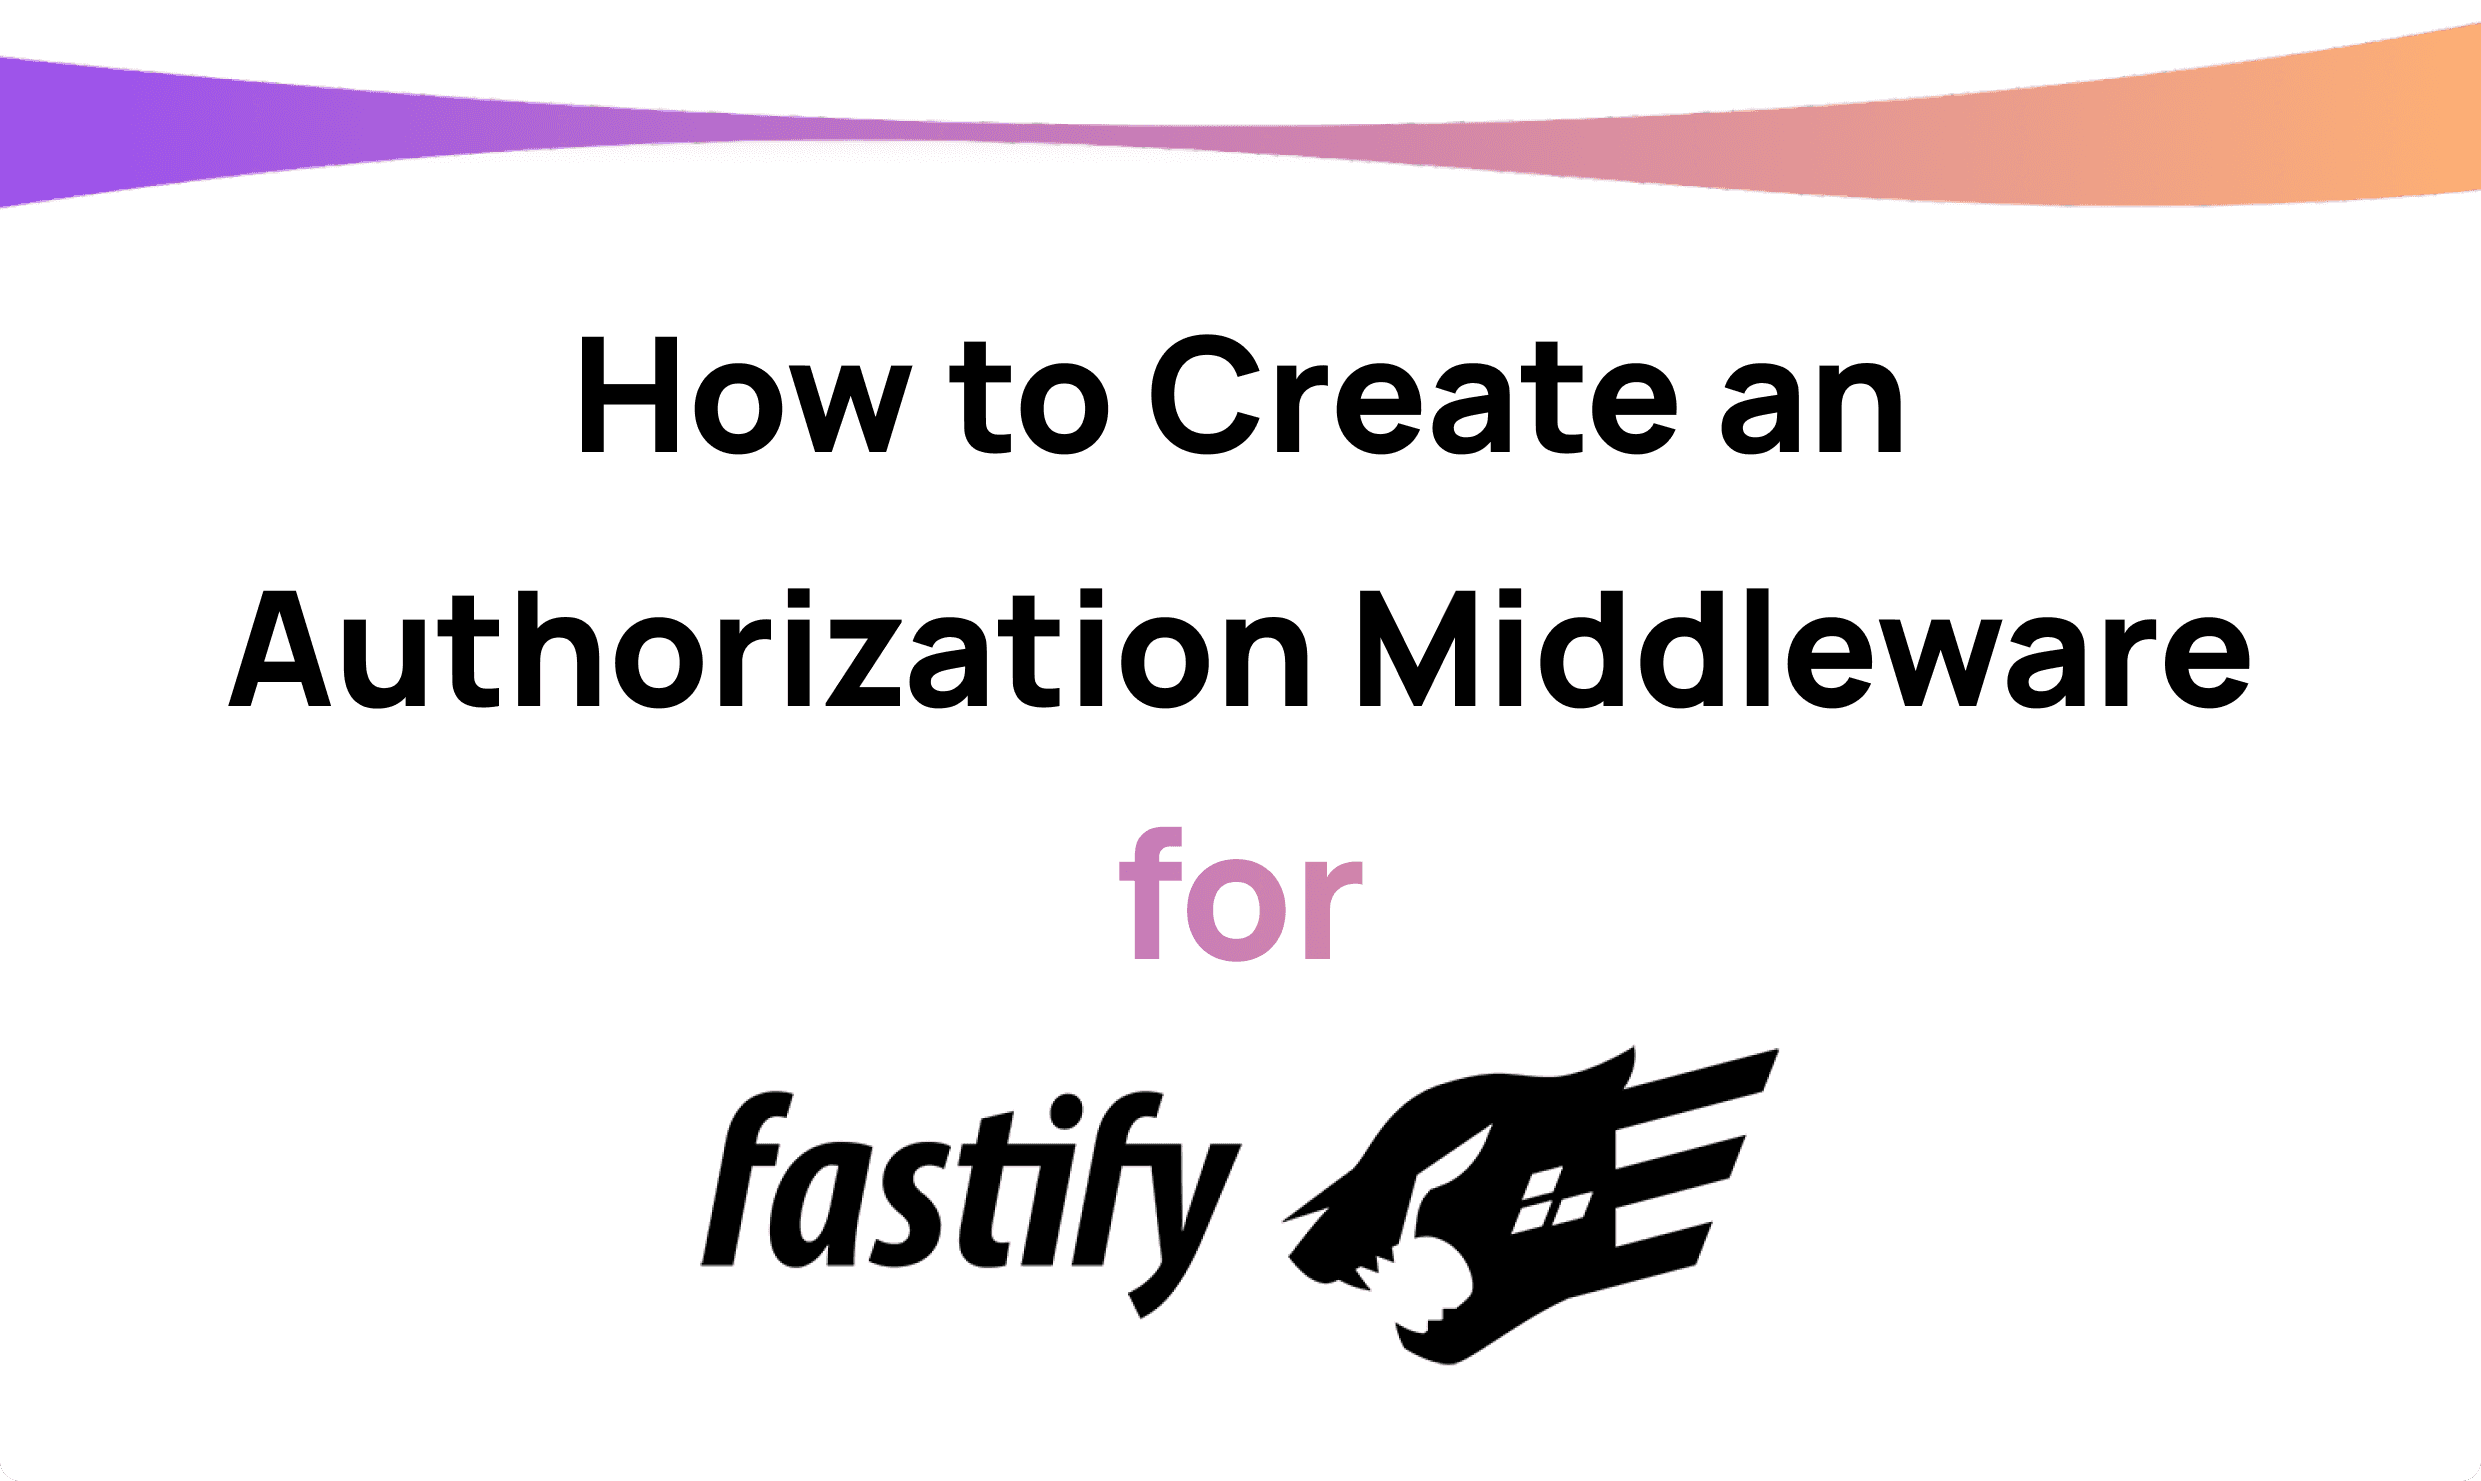 How to Create an Authorization Middleware for Fastify